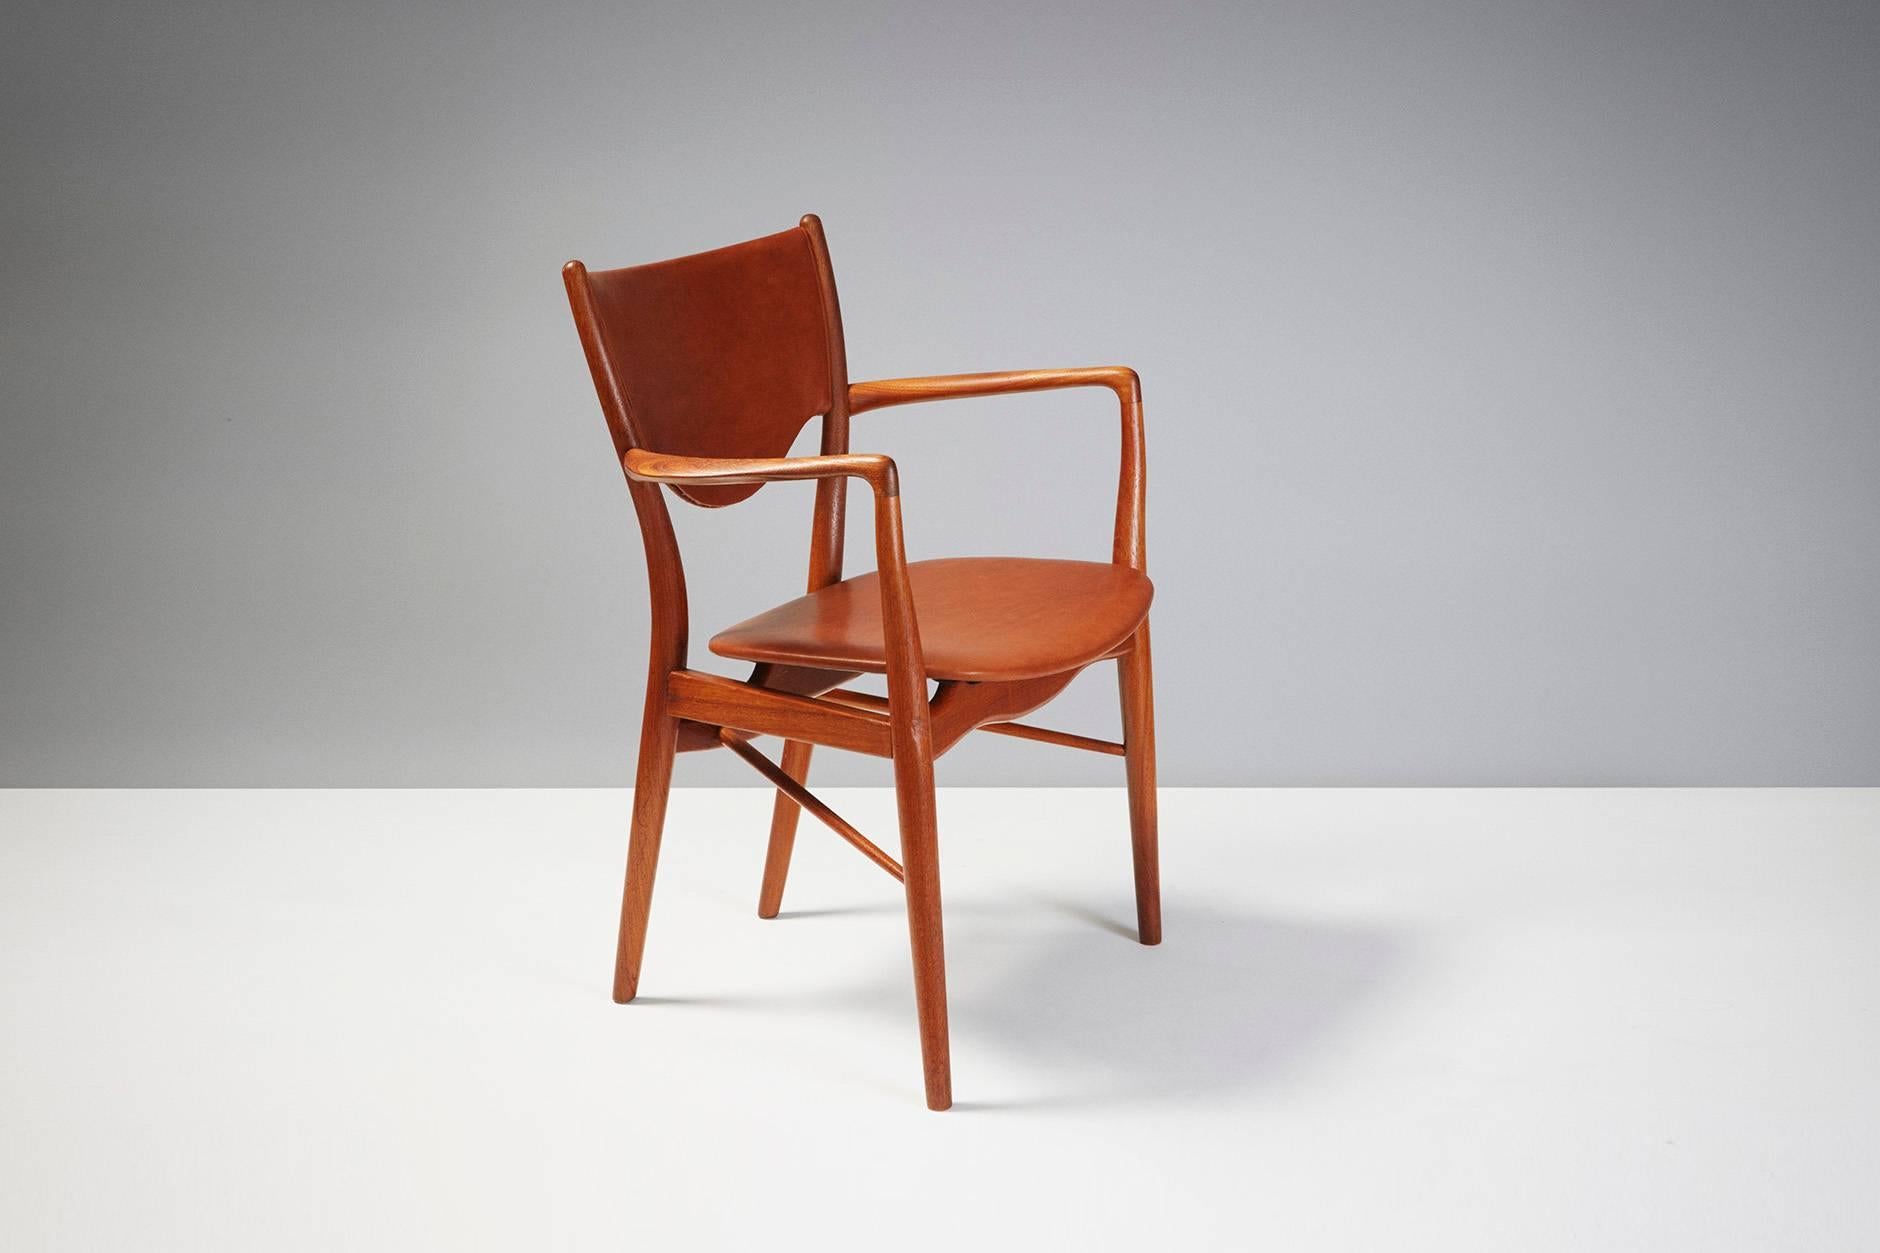 Finn Juhl

BO-76 armchair, 1953

Produced by Bovirke, Denmark. Patinated teak frame, leather seat and back. Minor signs of age, some abrasions on front legs.